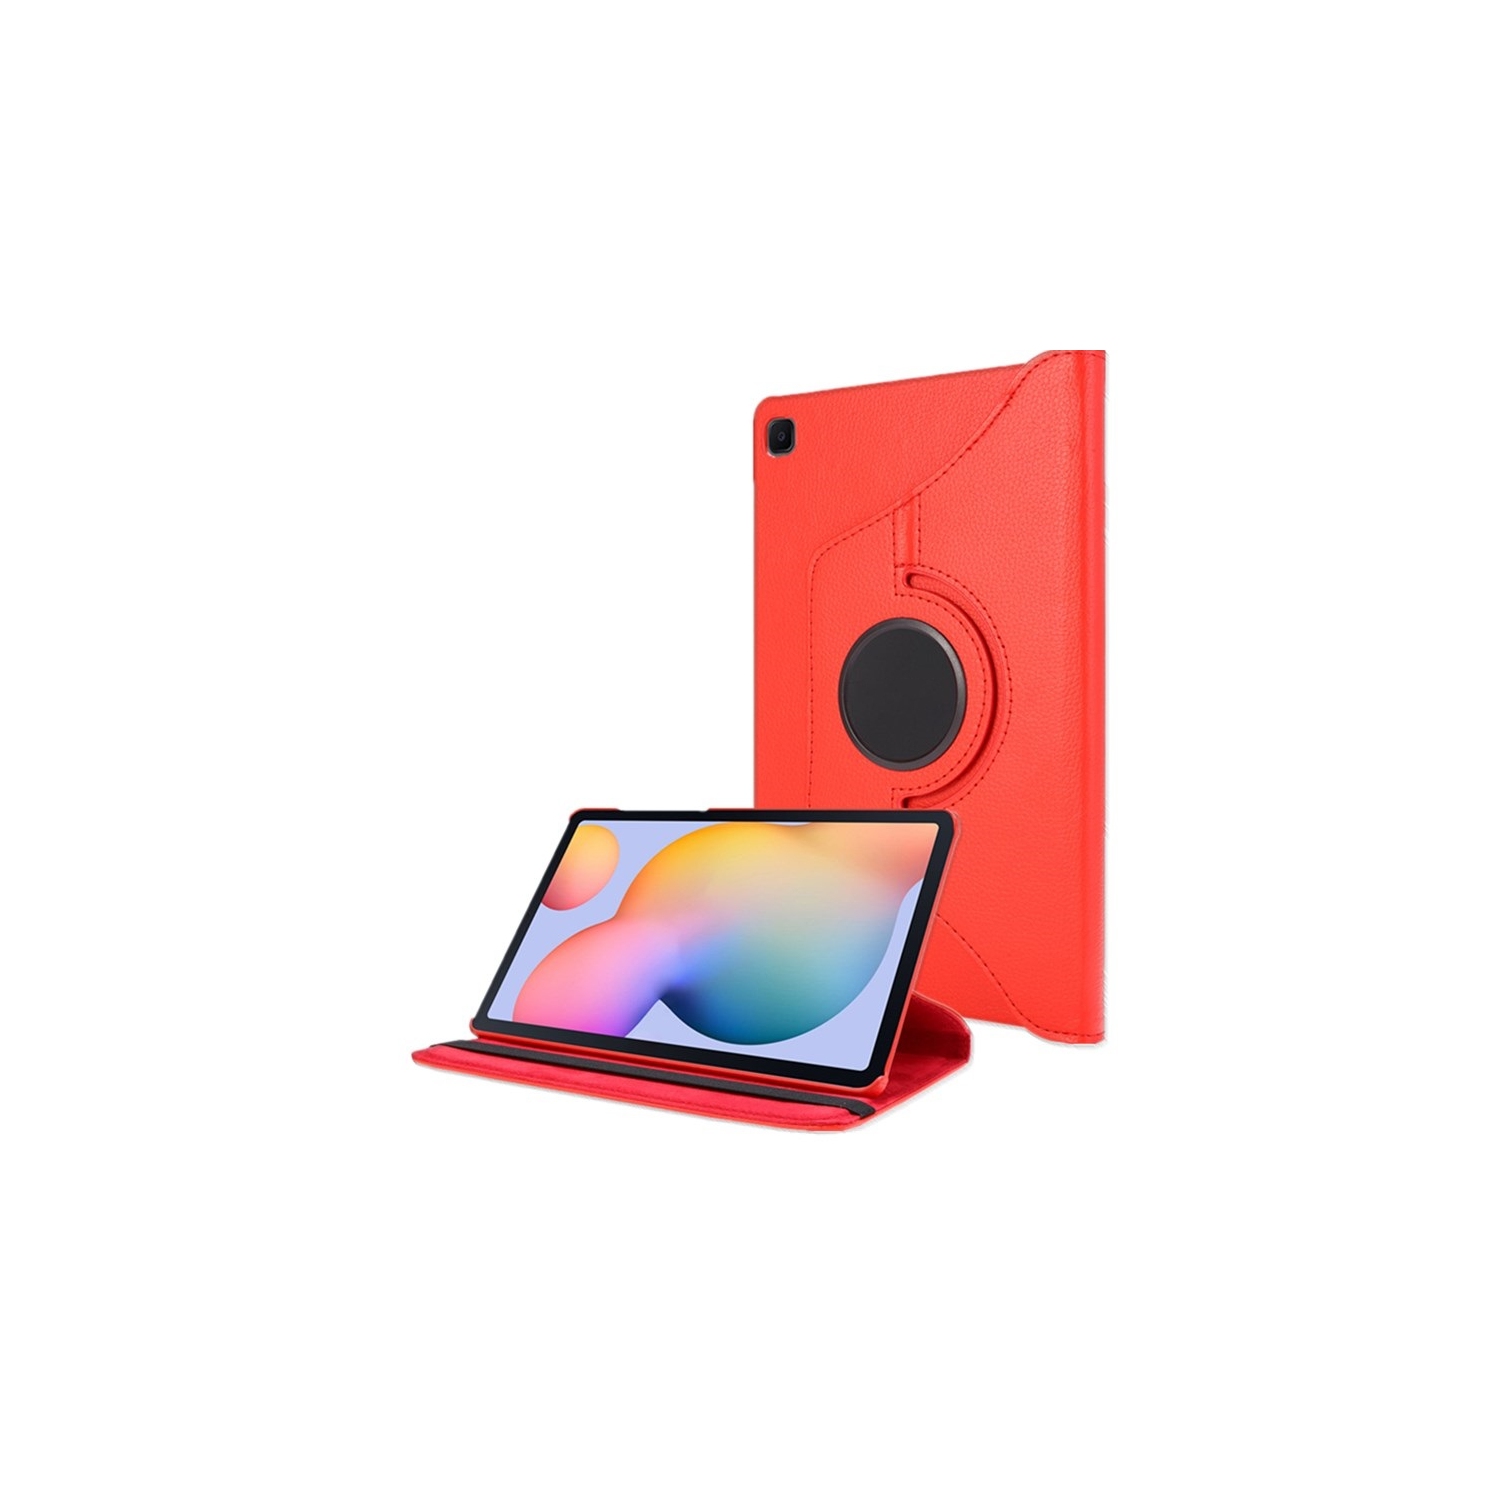 【CSmart】 360 Rotating PU Leather Stand Case Smart Cover for Samsung Galaxy Tab S6 Lite, P610 P615, Red